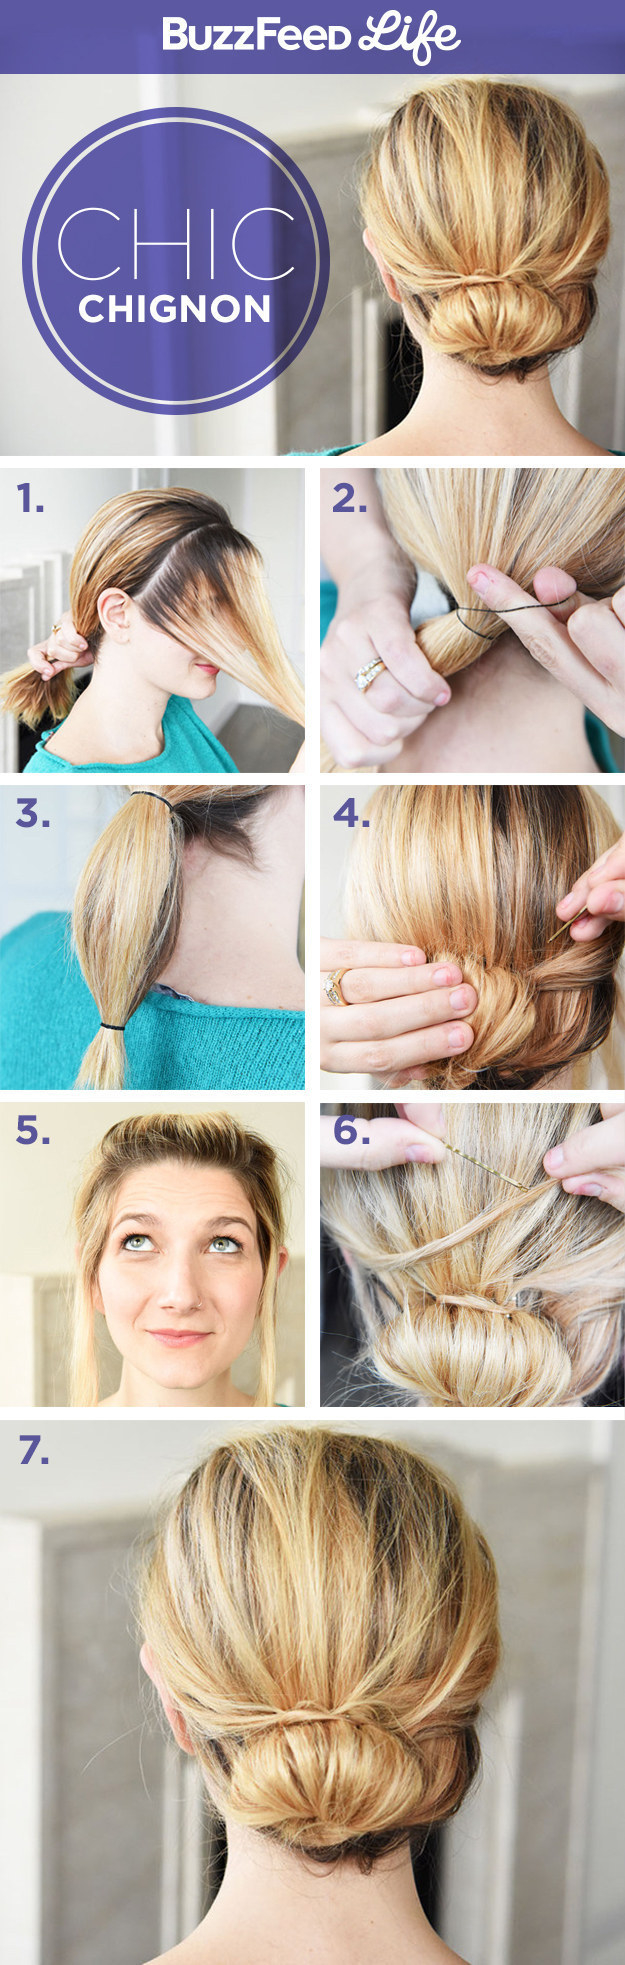 15 Easy Hairstyles For Medium Hair Step-by-Step | Cute ponytail hairstyles, Easy  hairstyles for medium hair, Braided ponytail hairstyles